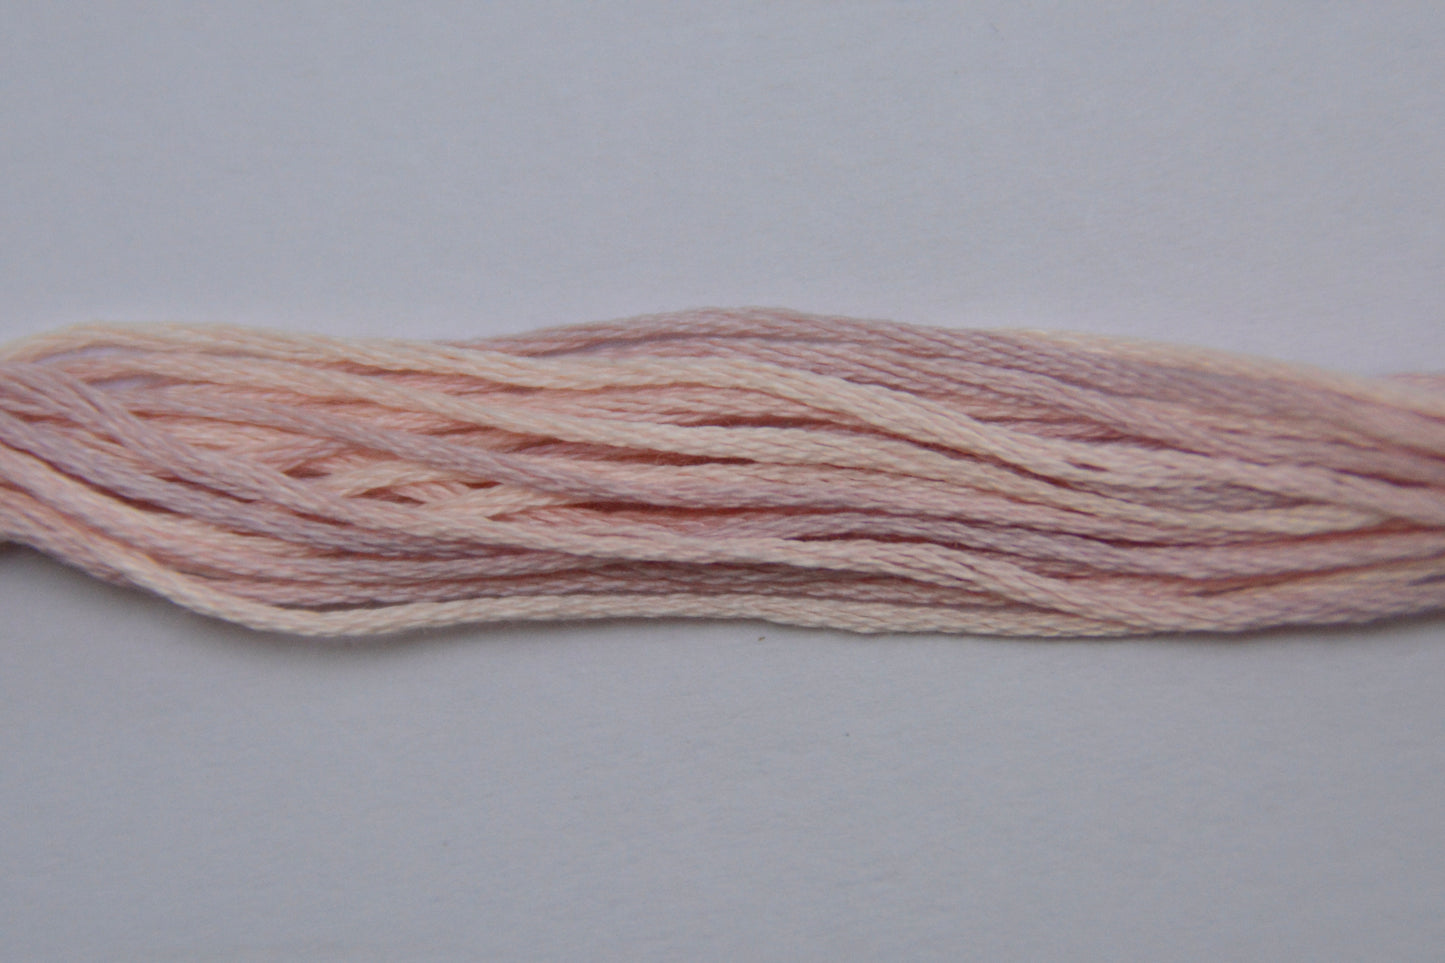 Chablis 1139 Weeks Dye Works 6-Strand Hand-Dyed Embroidery Floss